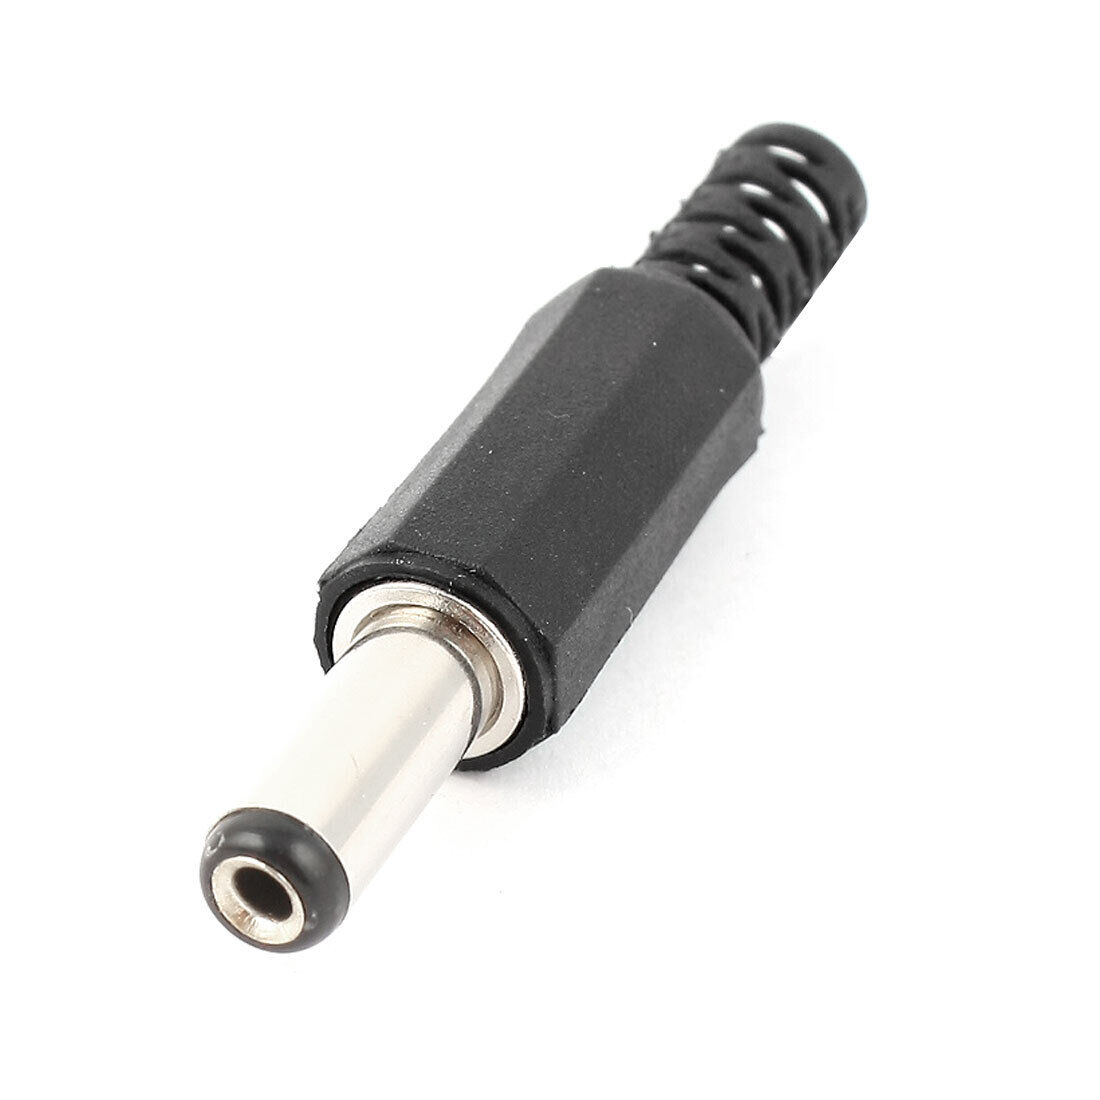 Black 5.5mm x 2.1 mm DC Male Power Cable Connector Adapter